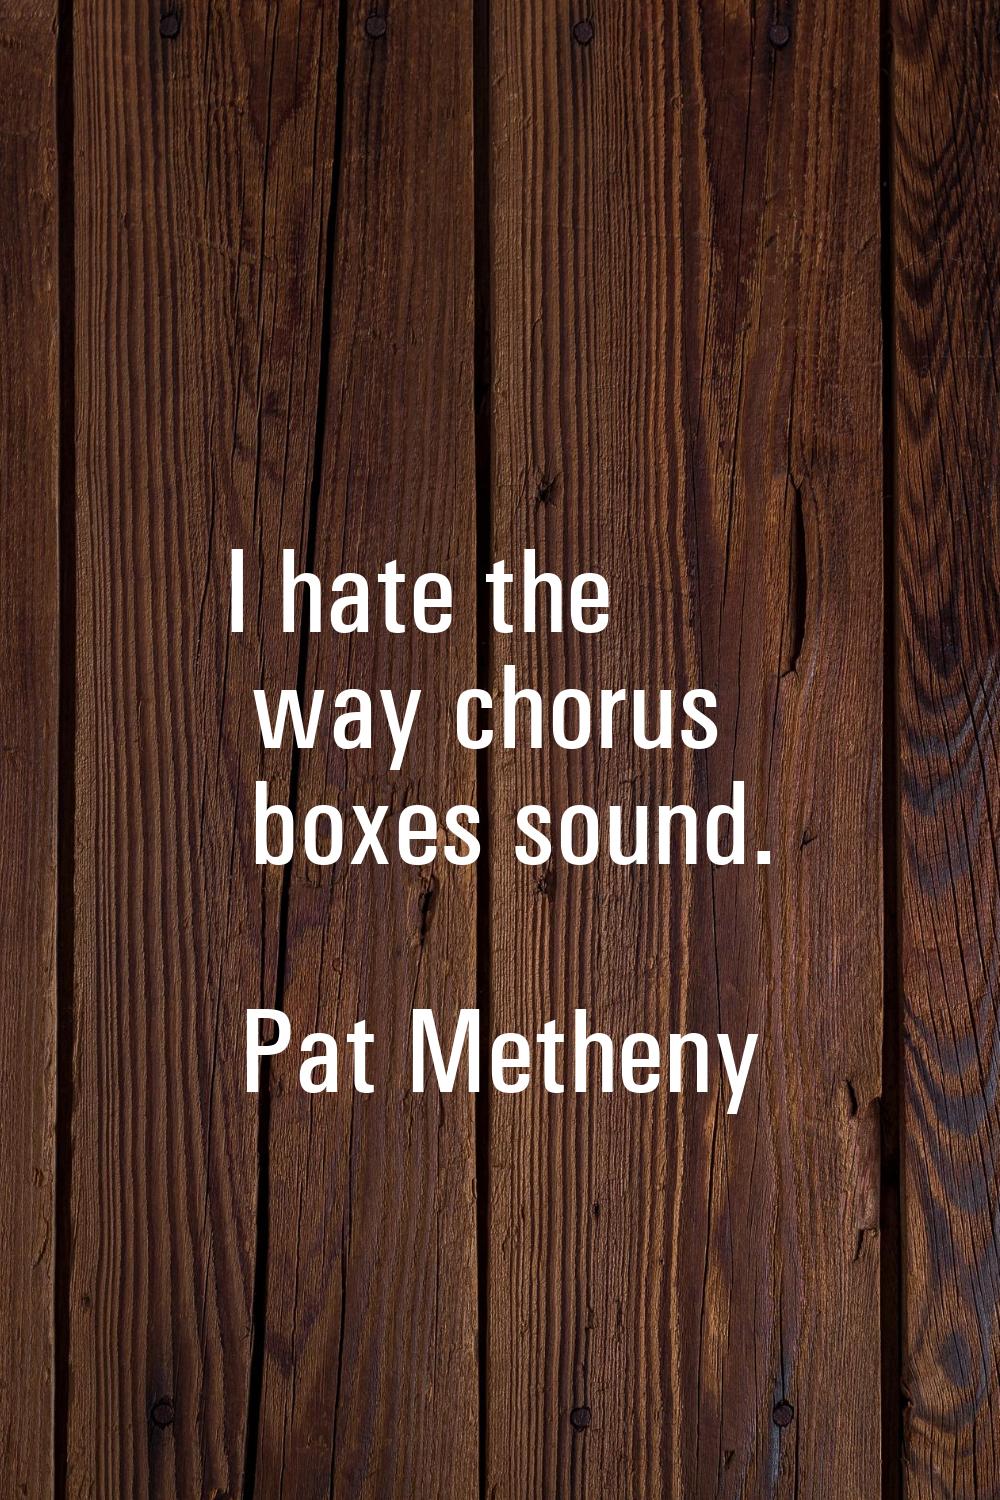 I hate the way chorus boxes sound.